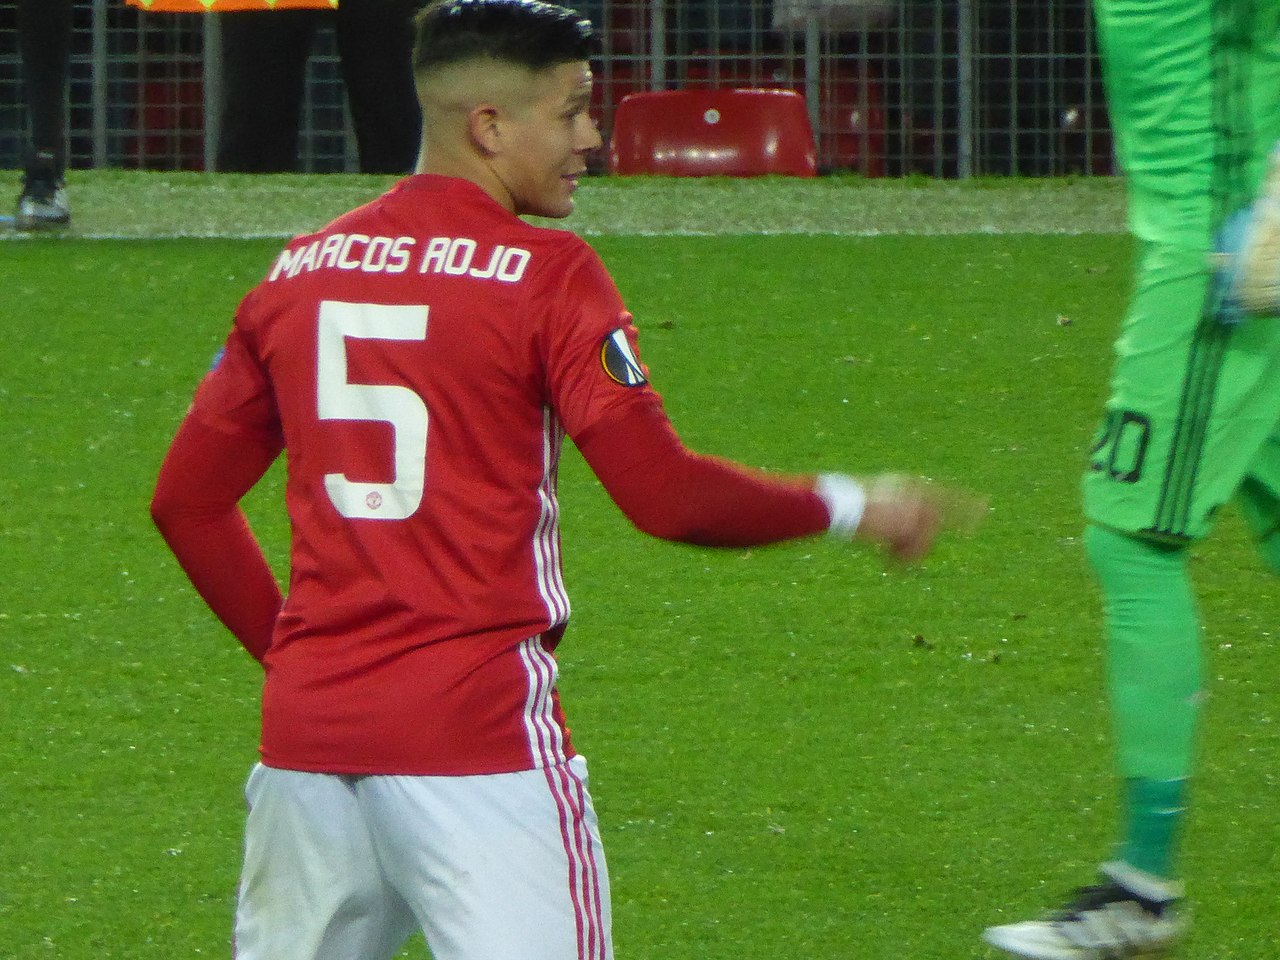 Marcos Rojo stripped off shirt number 